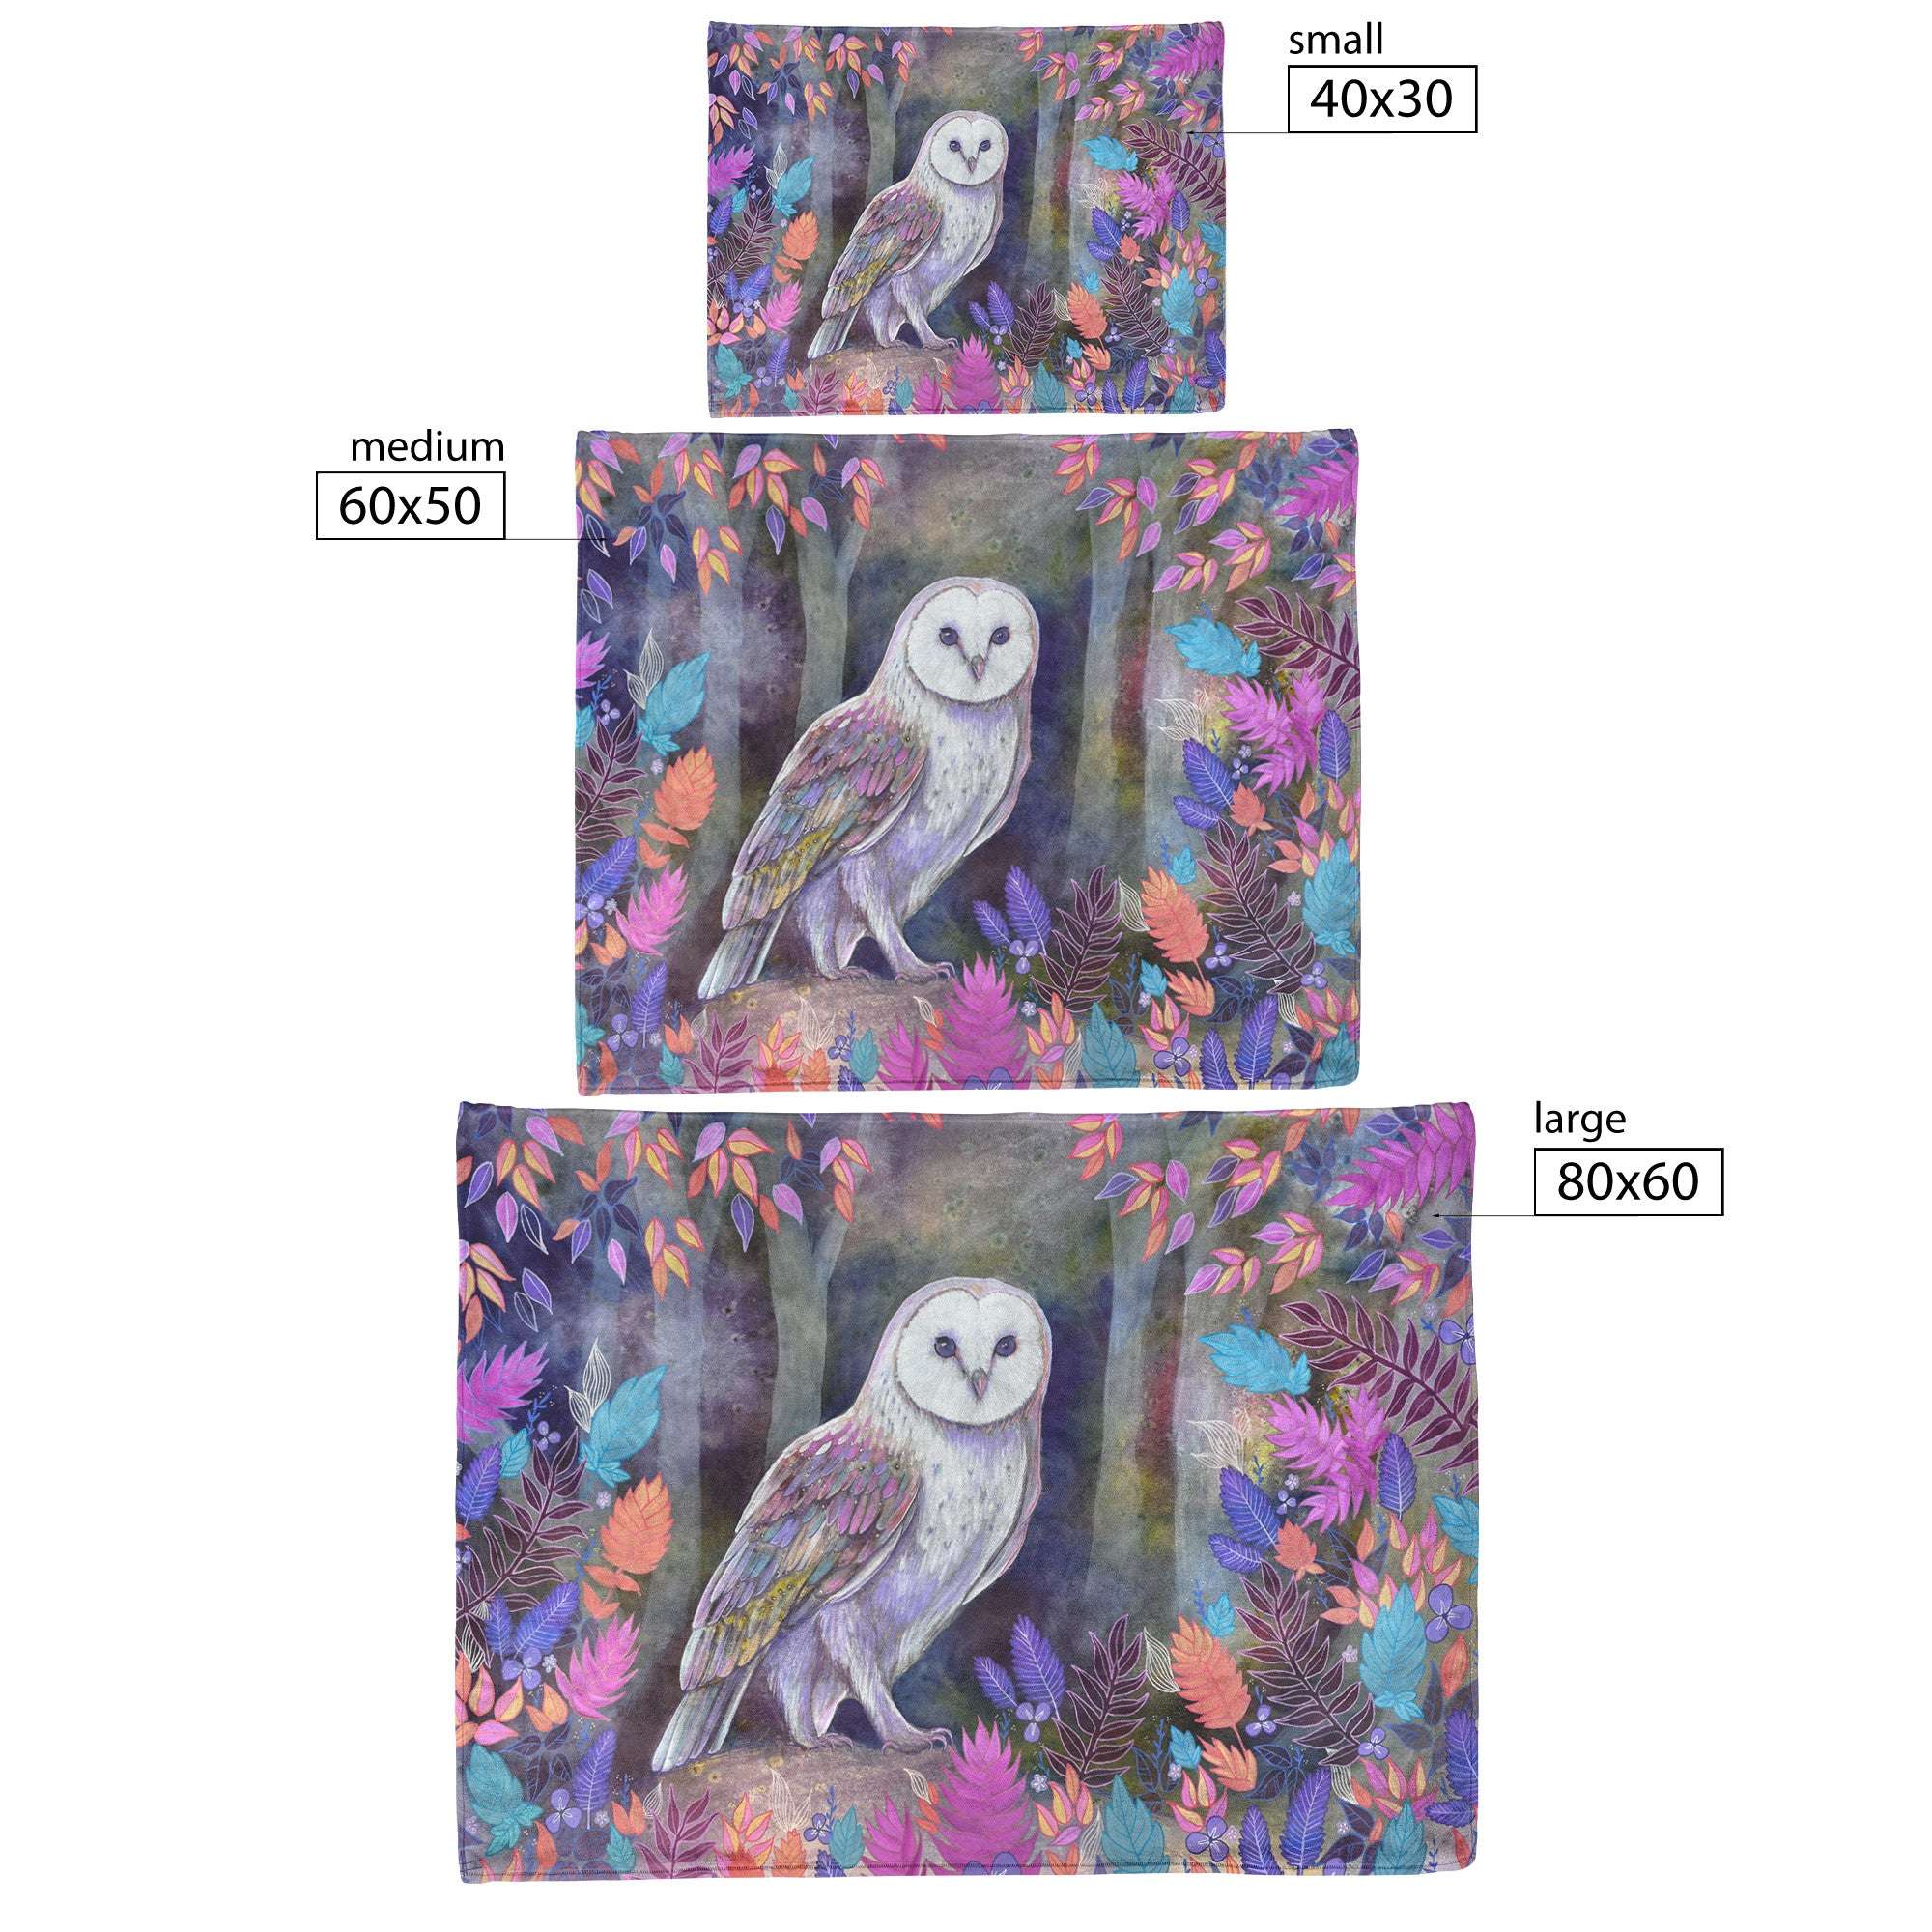 Three Owl Blankets depicting a white owl perched on branches among colorful leaves, displayed in small, medium, and large sizes with size dimensions labeled.